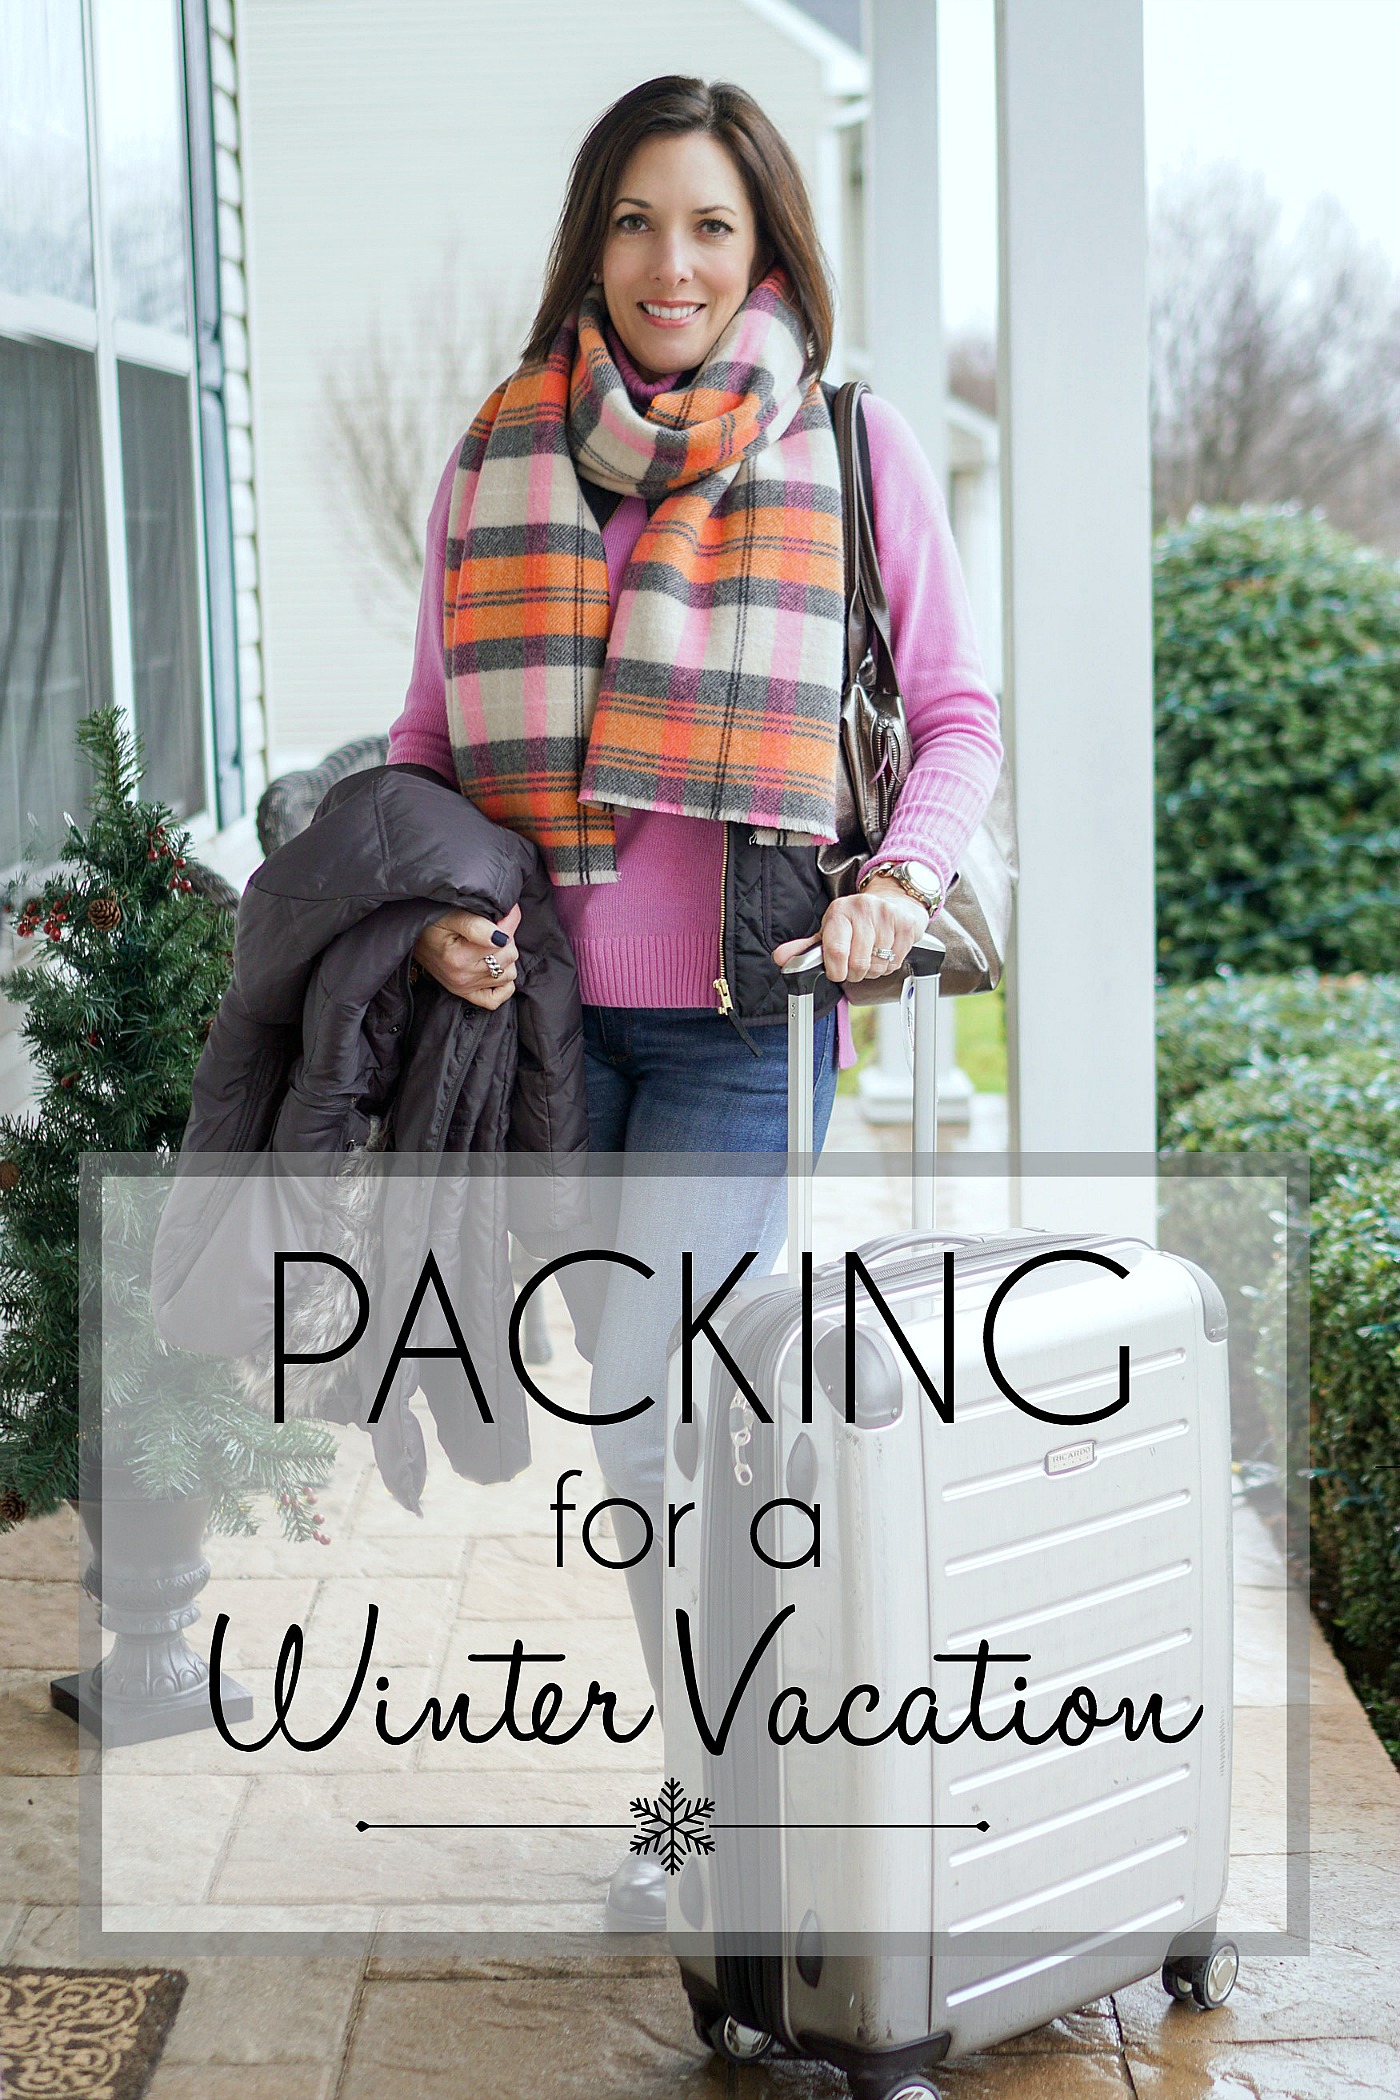 Packing for a Winter Vacation